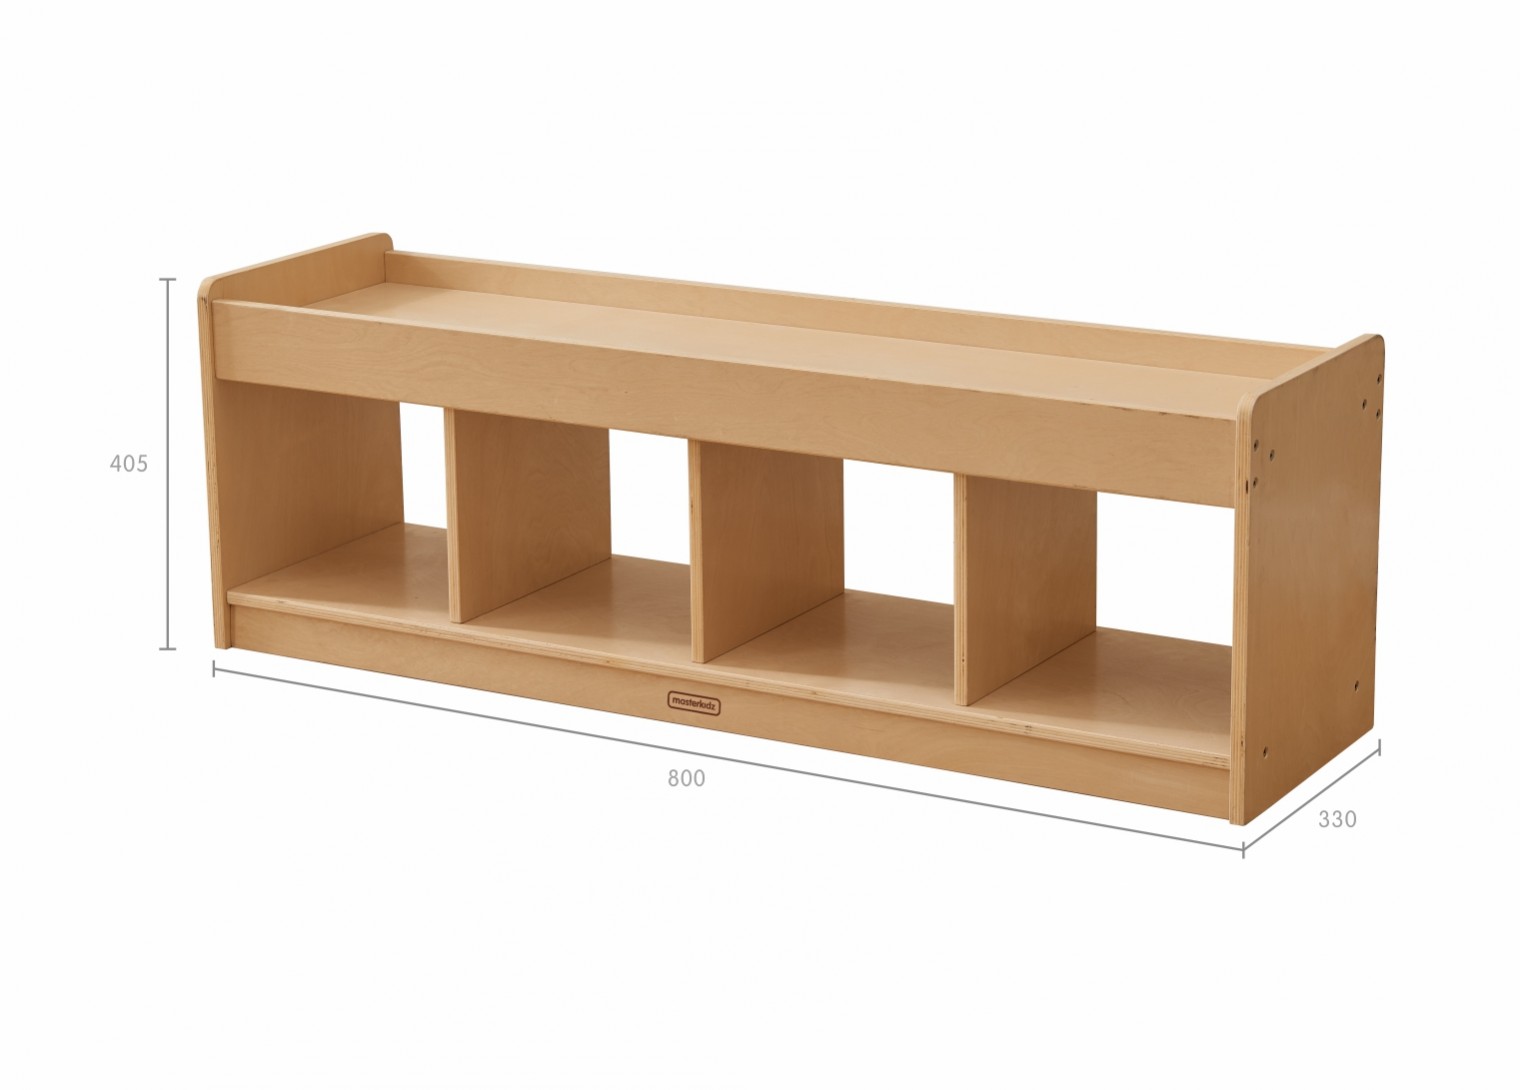 Toddler Play Center - 1200L 4-Compartment Shelving Unit